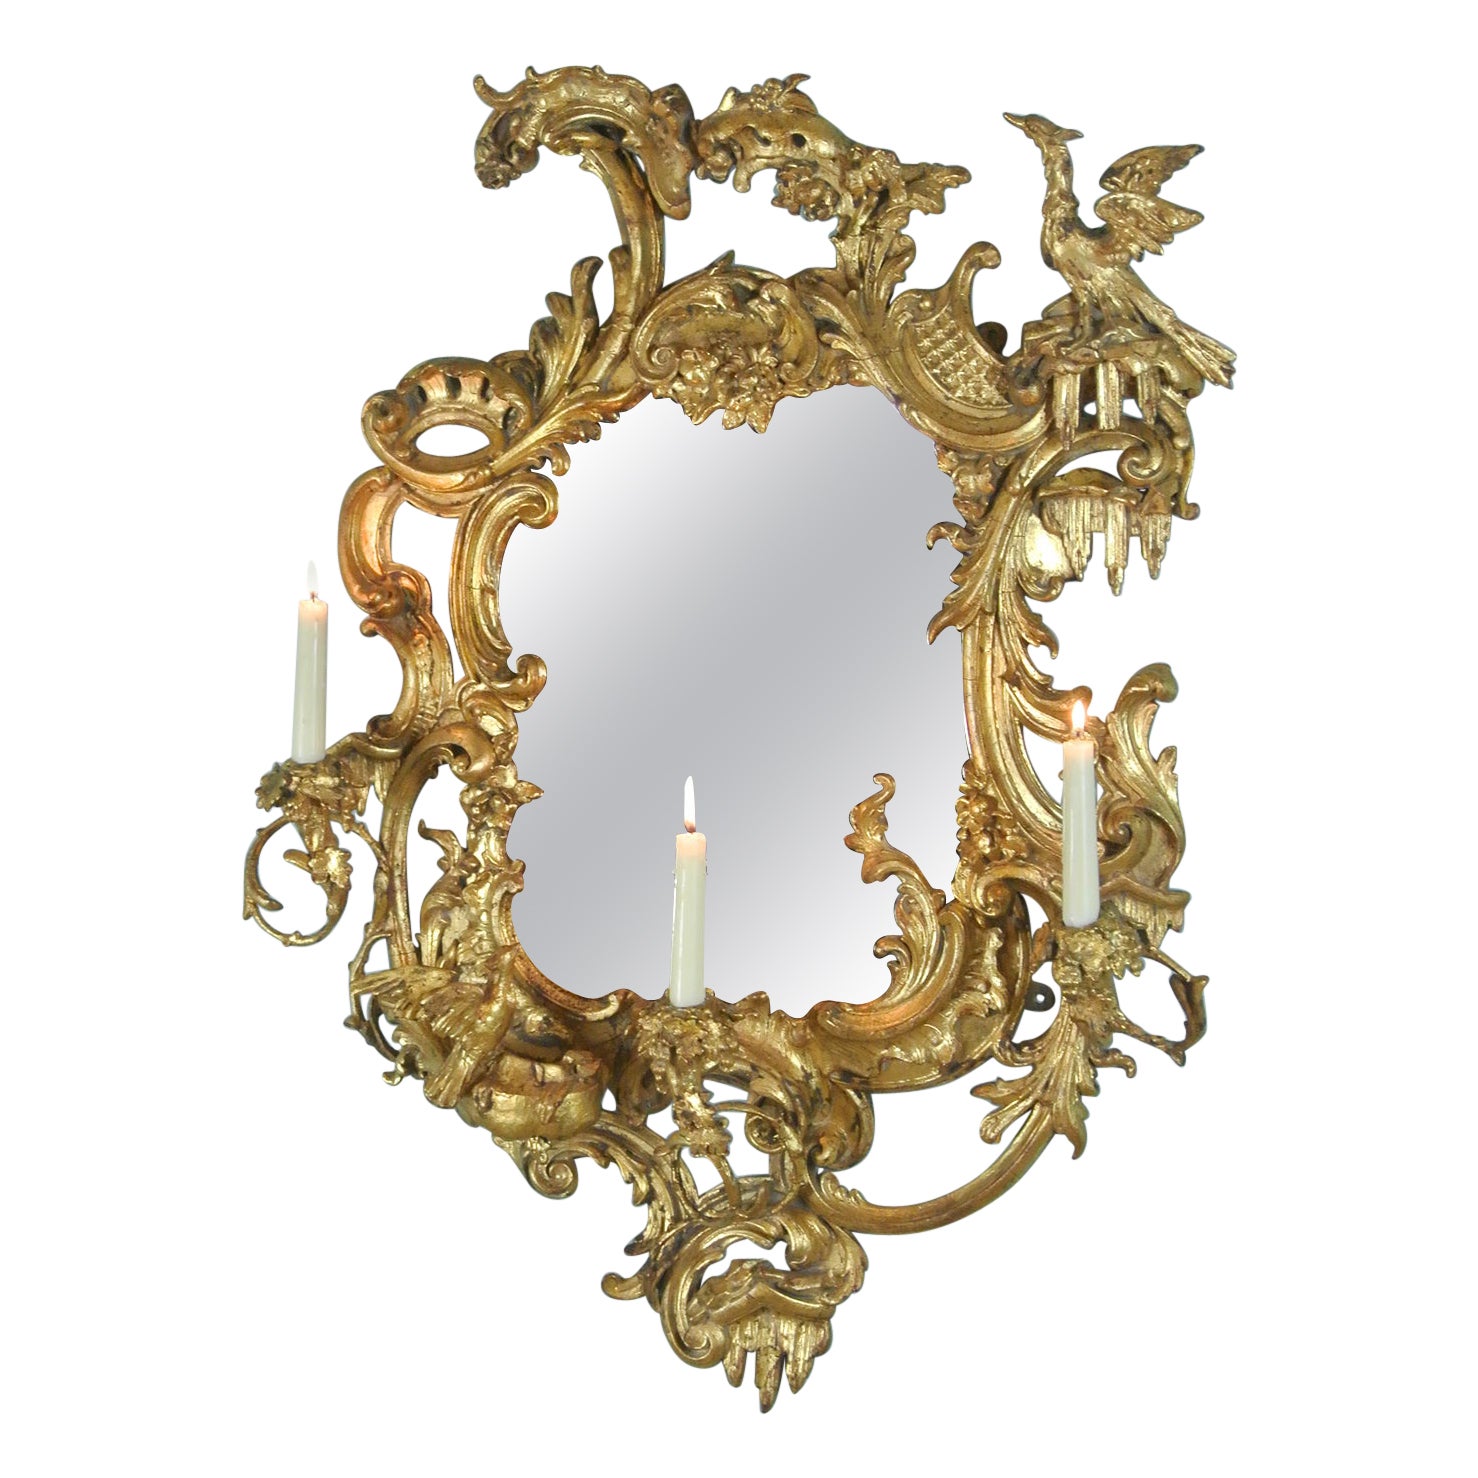 Important George II Chippendale Period Carved Giltwood Girandole Mirror c.1750